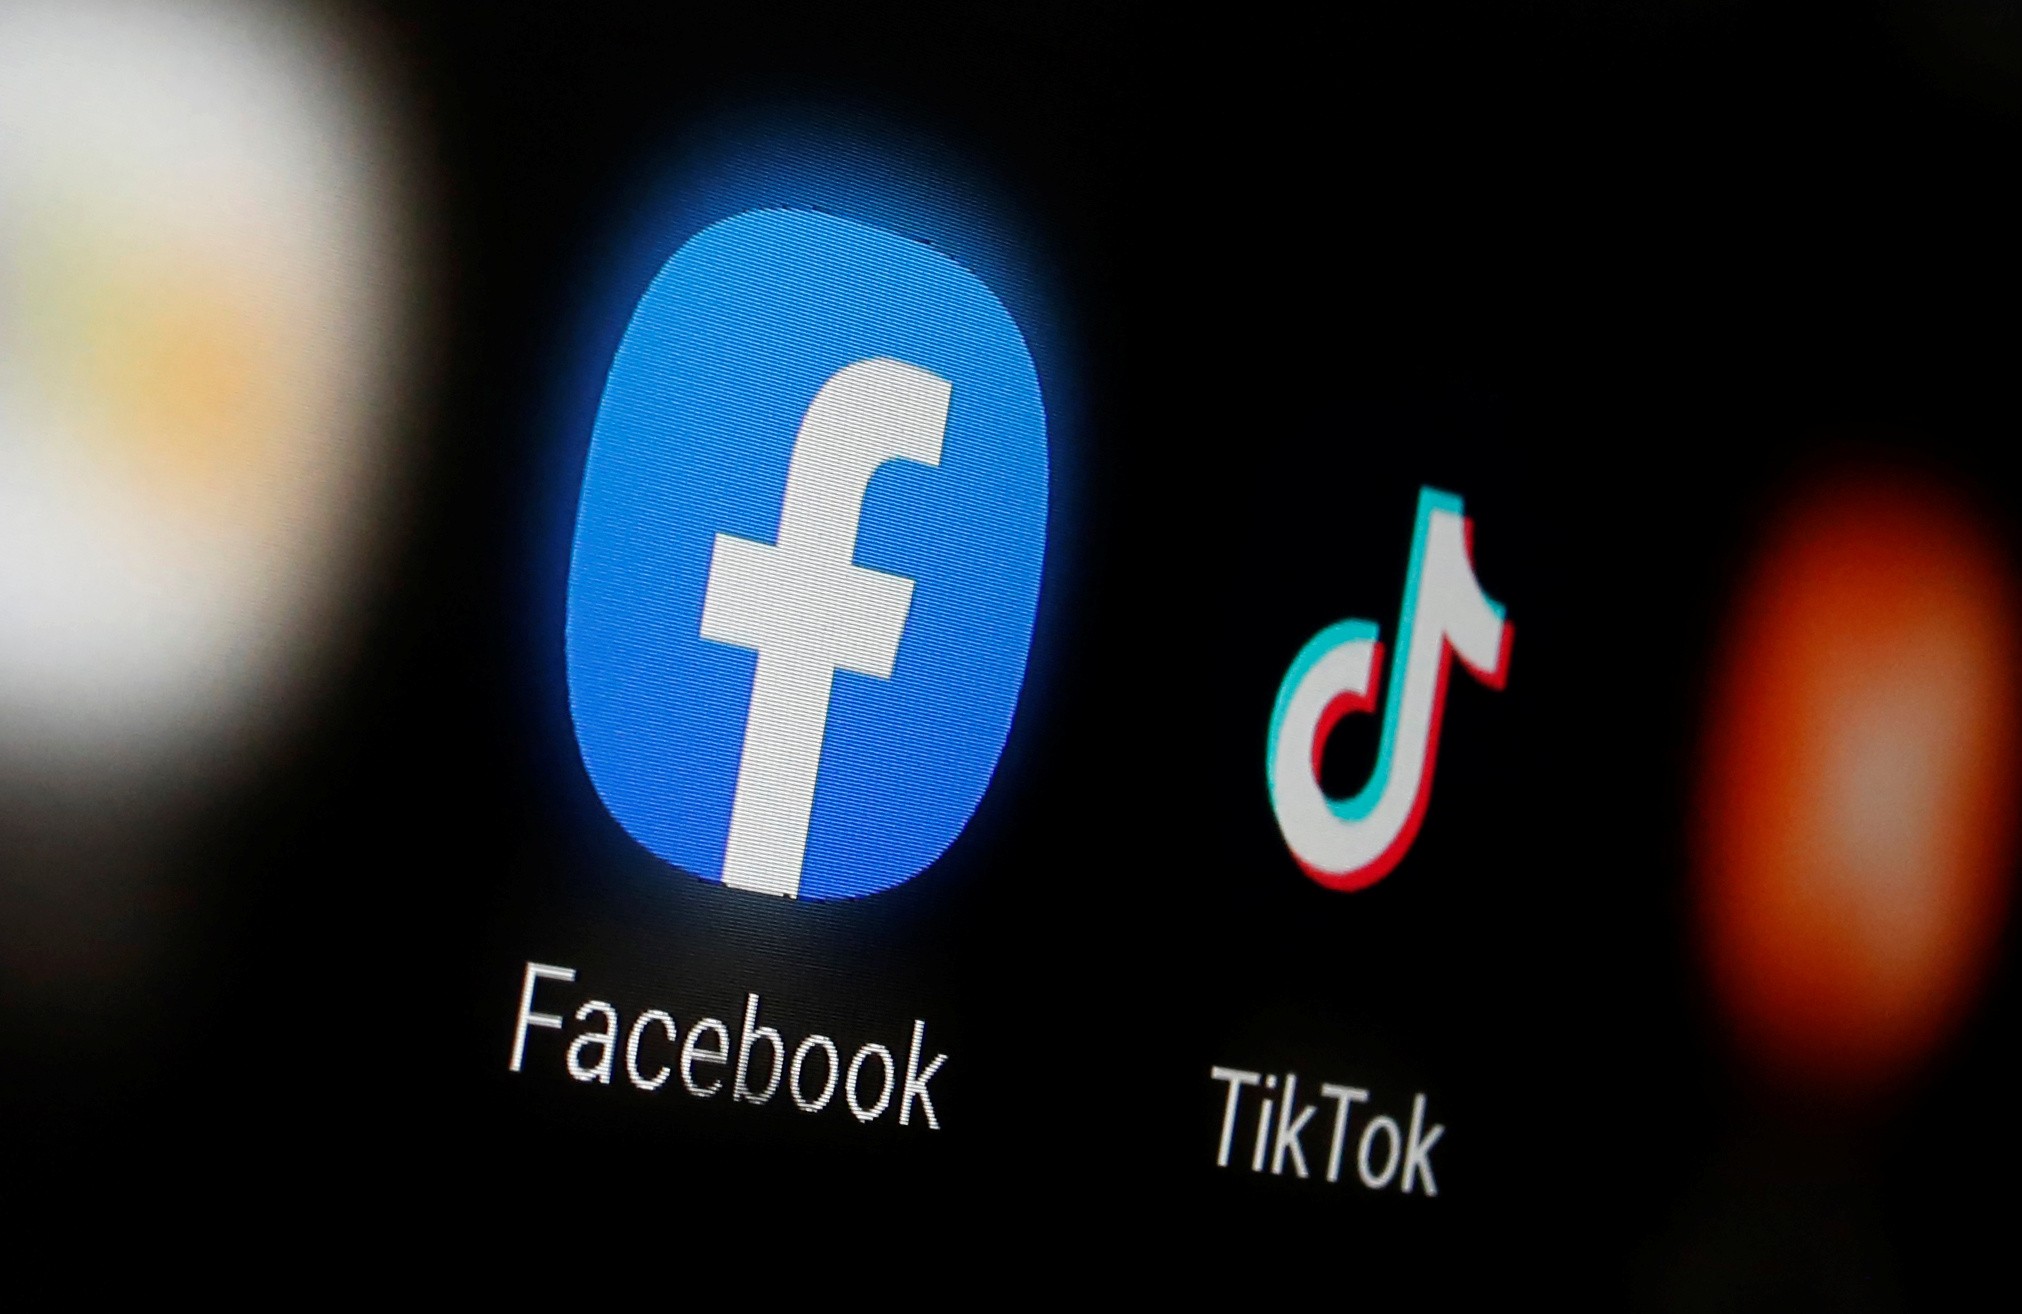 To curb the growth of TikTok, Facebook released Lasso, a similar app targeted also at the youth market. Lasso failed miserably: it was installed only 425,000 times between November 2018 and October 2019, compared with TikTok’s 640 million times. Photo: Reuters